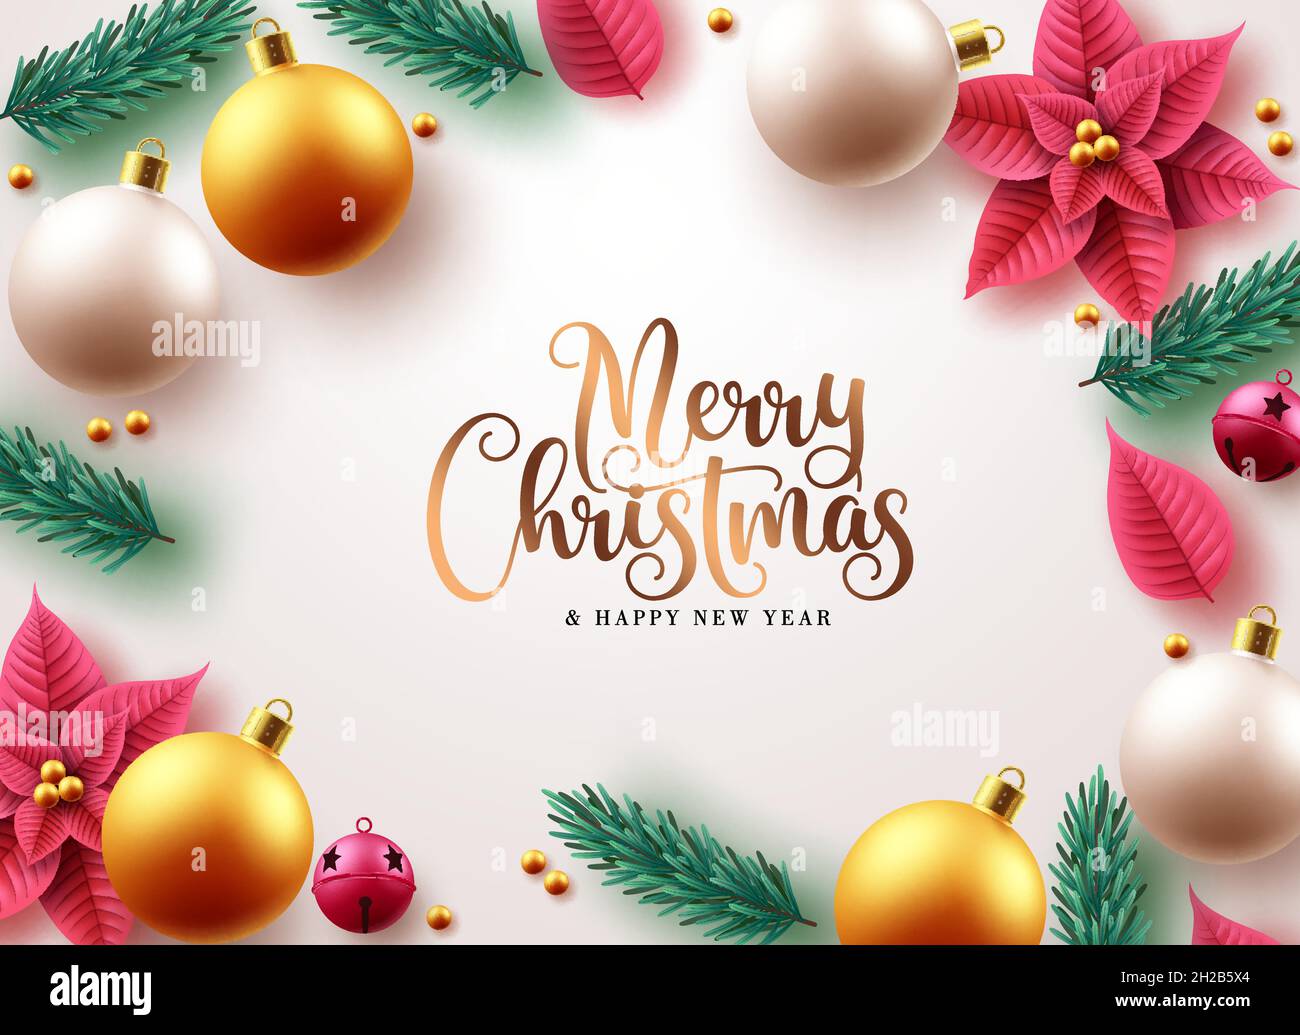 https://c8.alamy.com/comp/2H2B5X4/merry-christmas-vector-background-design-christmas-greeting-text-with-xmas-balls-fir-branches-and-poinsettia-elements-for-holiday-season-card-2H2B5X4.jpg